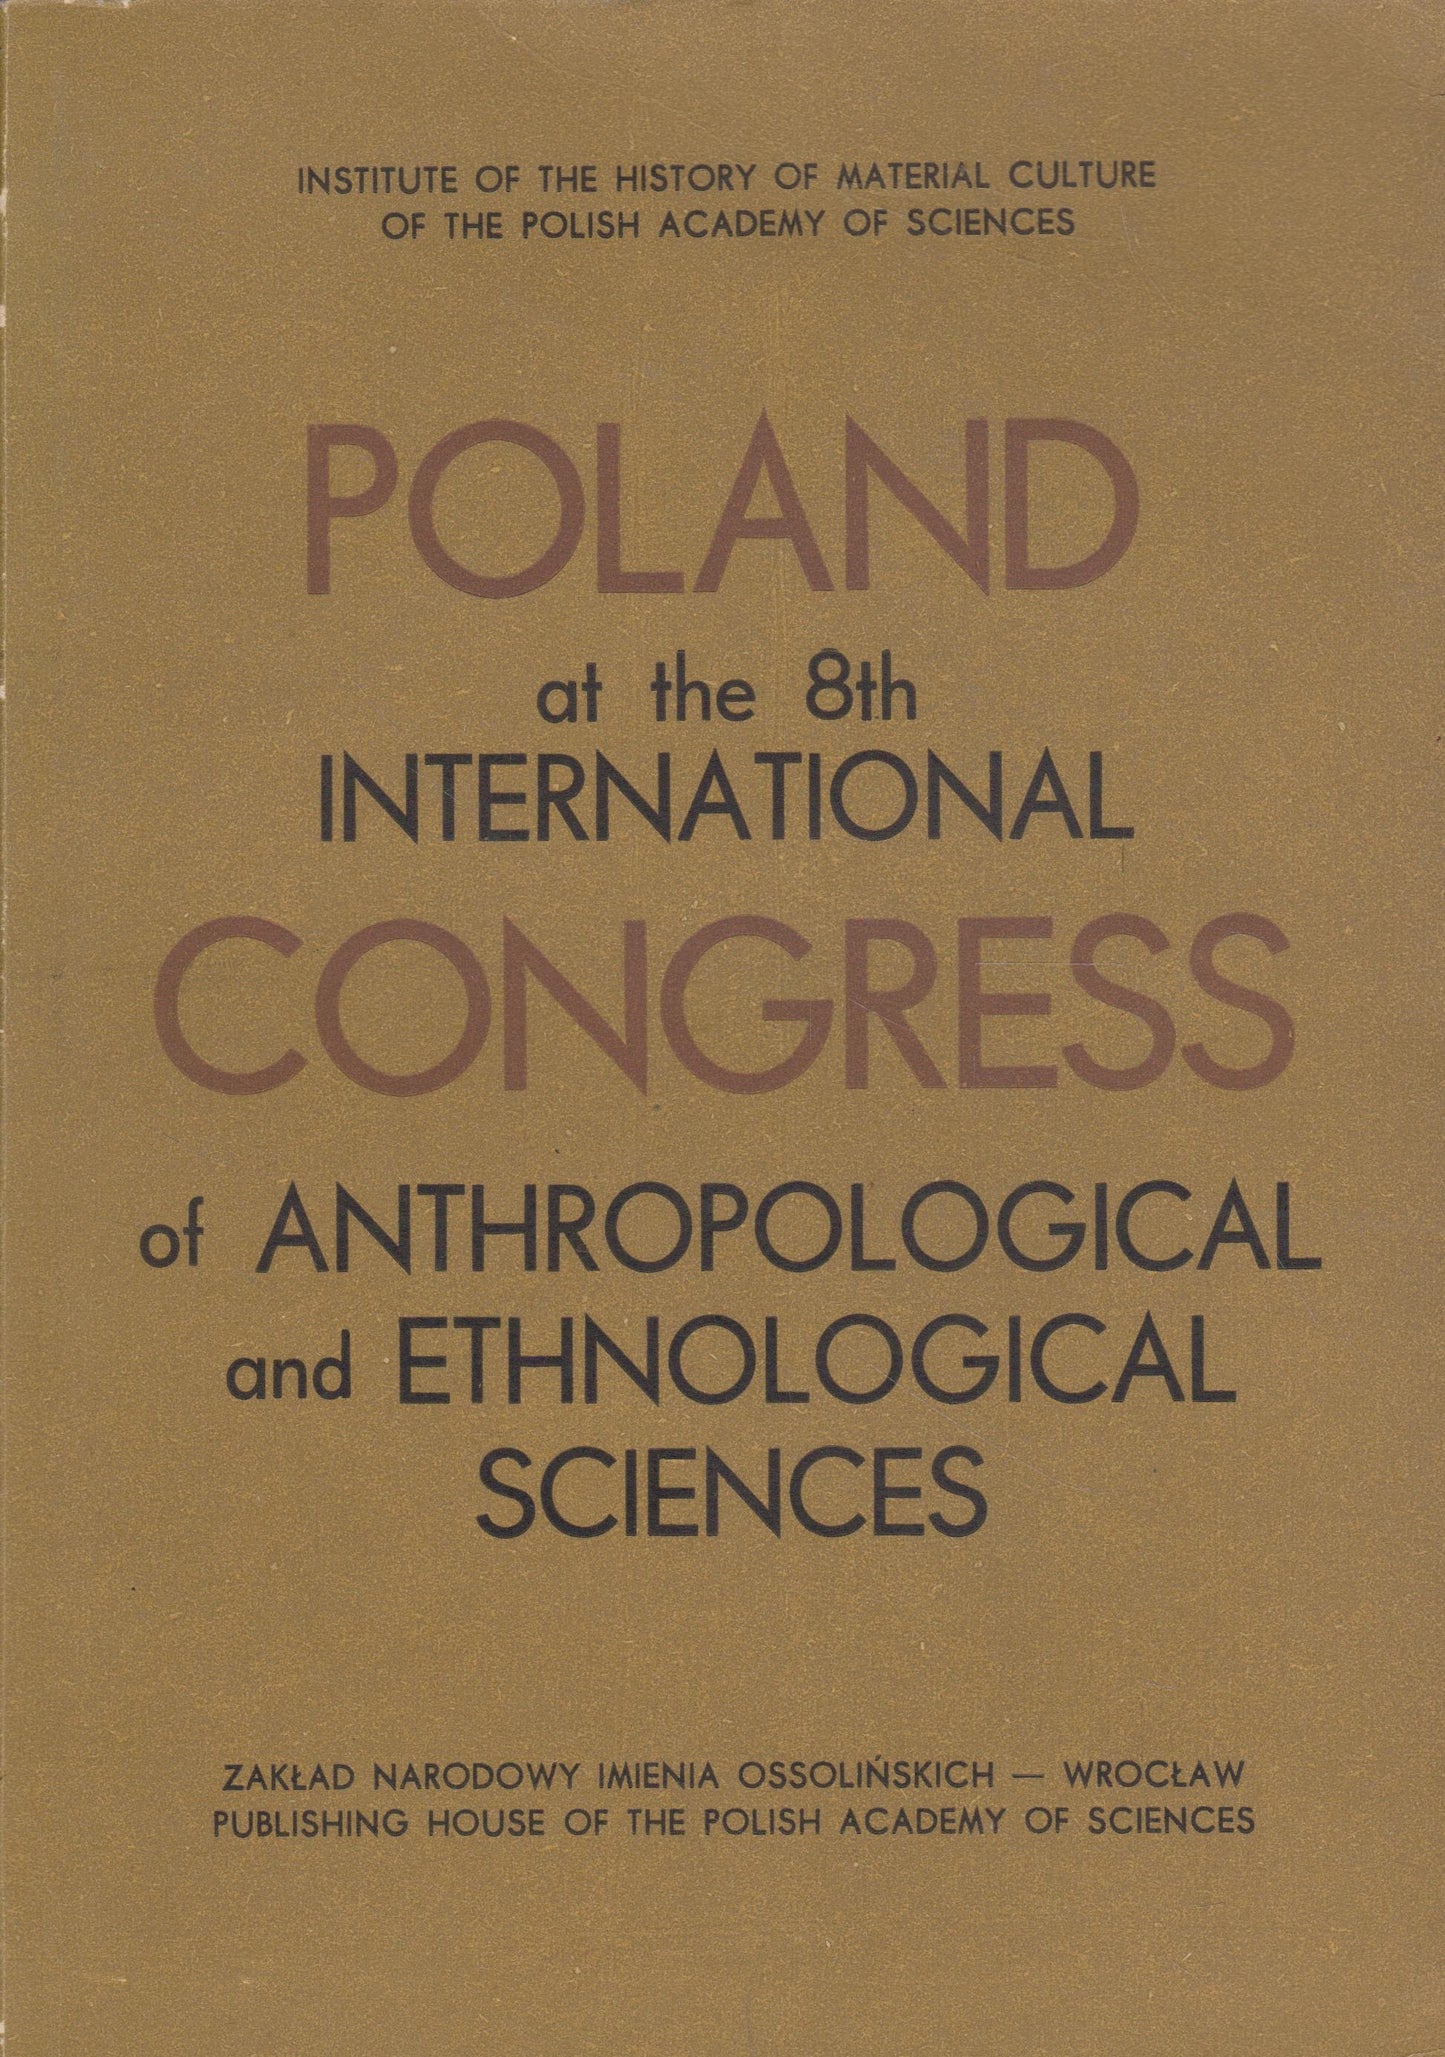 Poland at the 8th International Congress of Anthropological and Ethnological Sciences